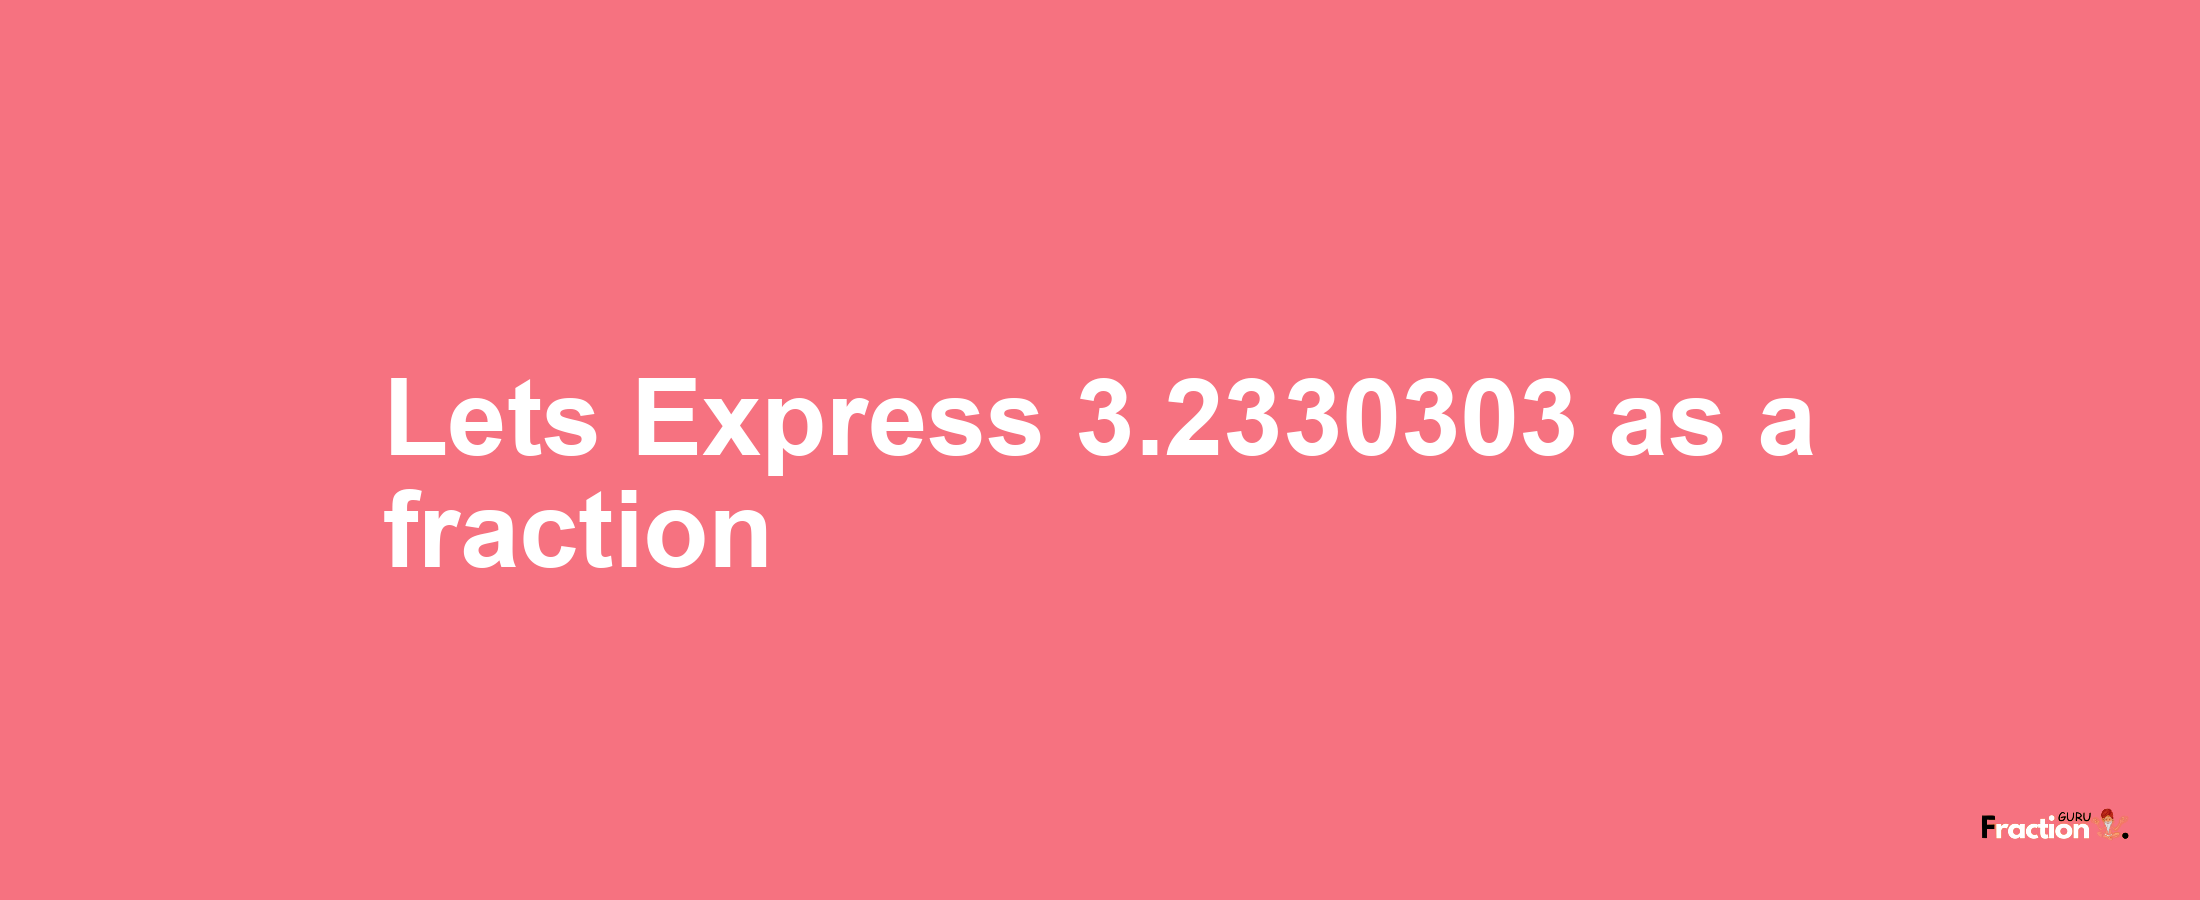 Lets Express 3.2330303 as afraction